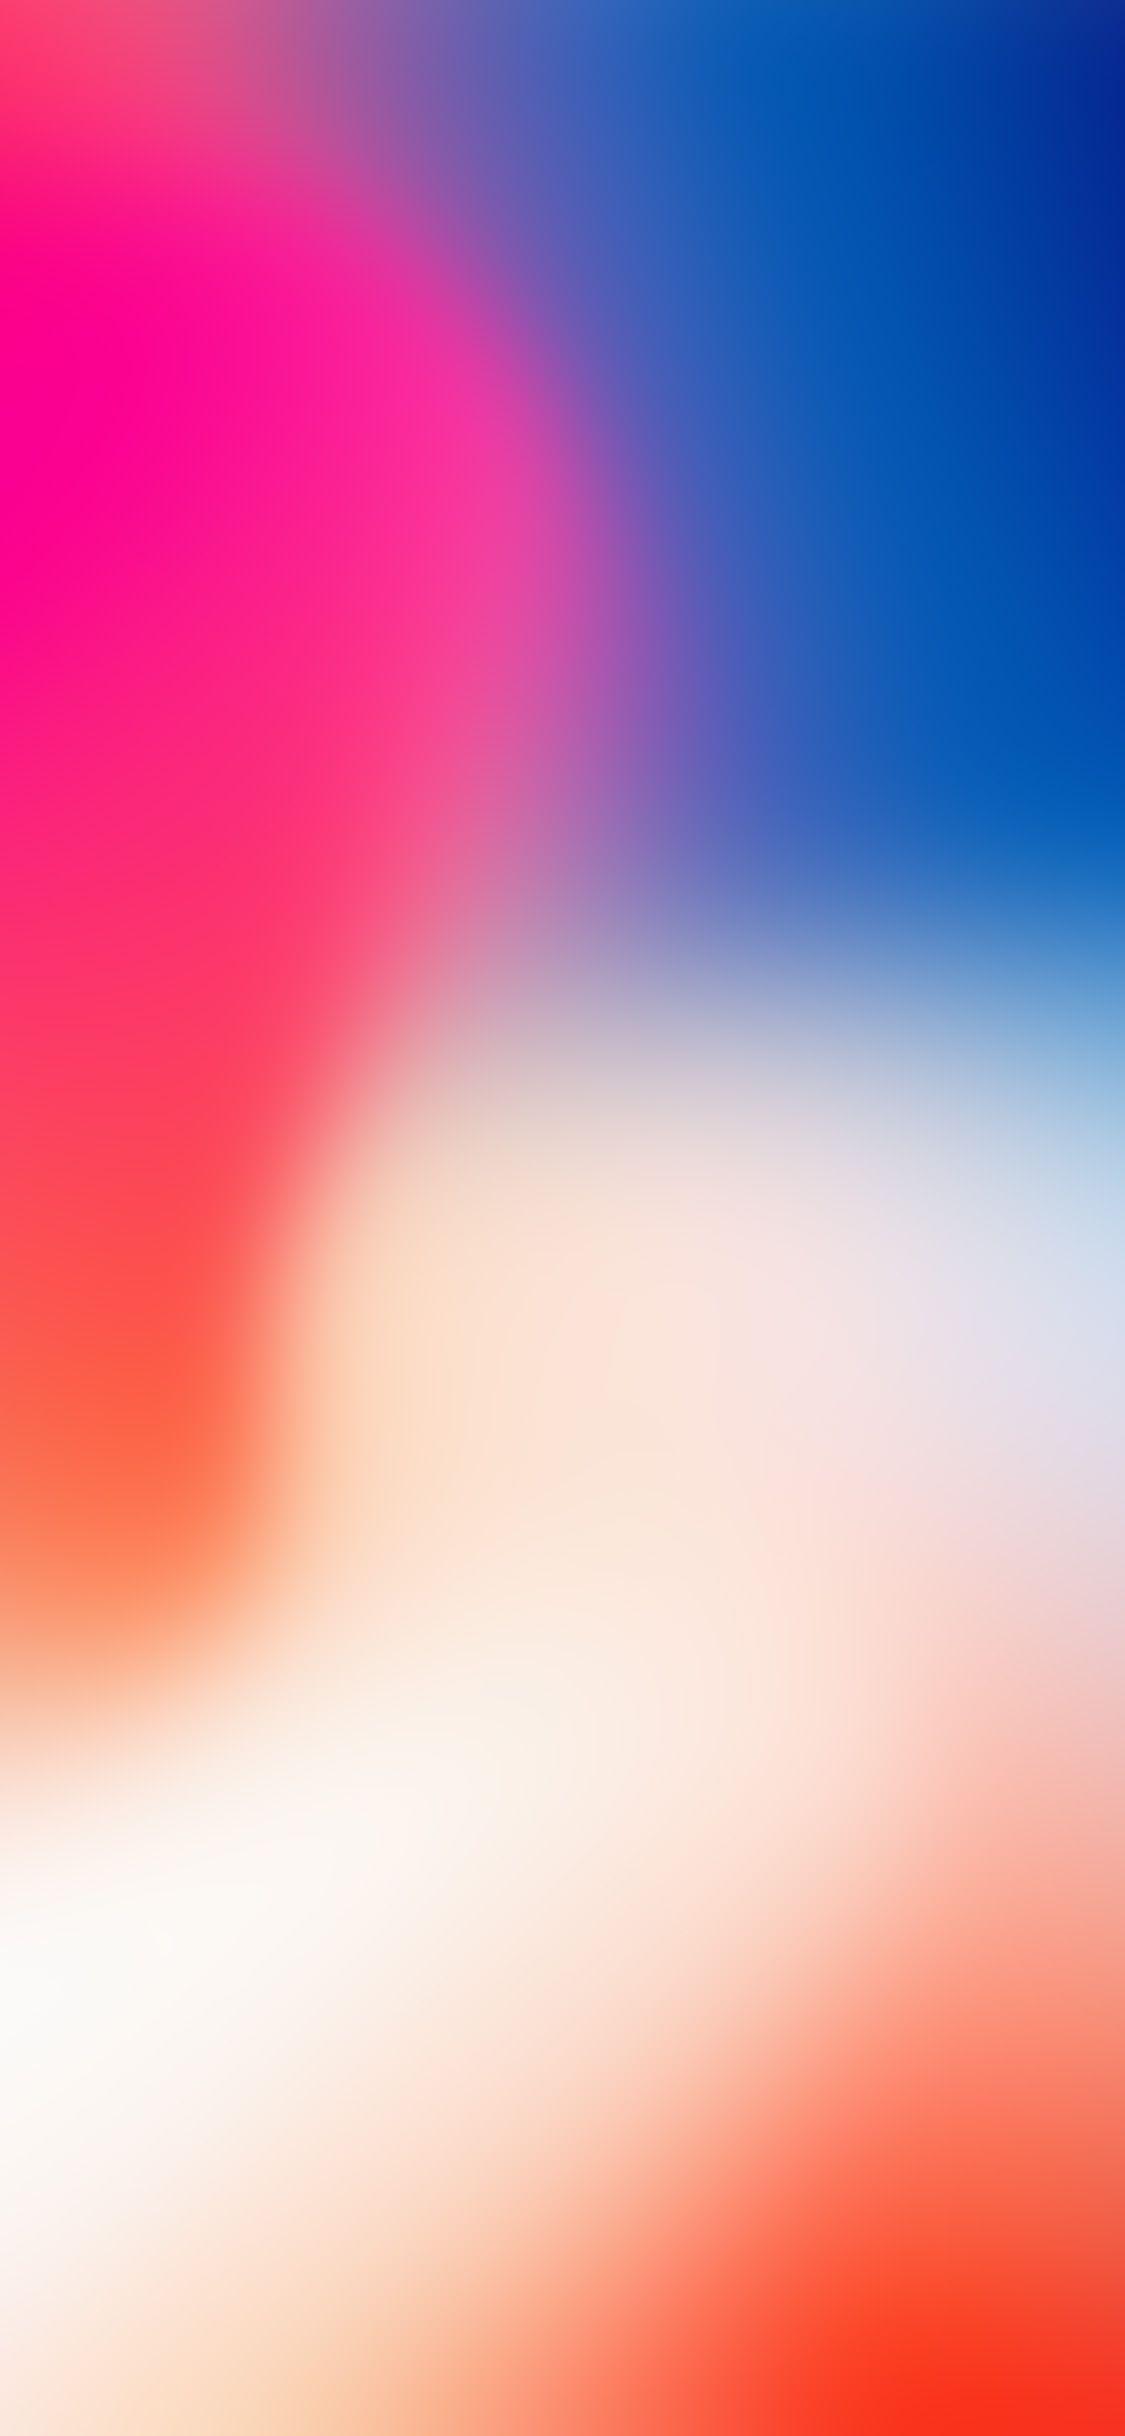 iPhone X HD Wallpapers - Top Free iPhone X HD Backgrounds - WallpaperAccess